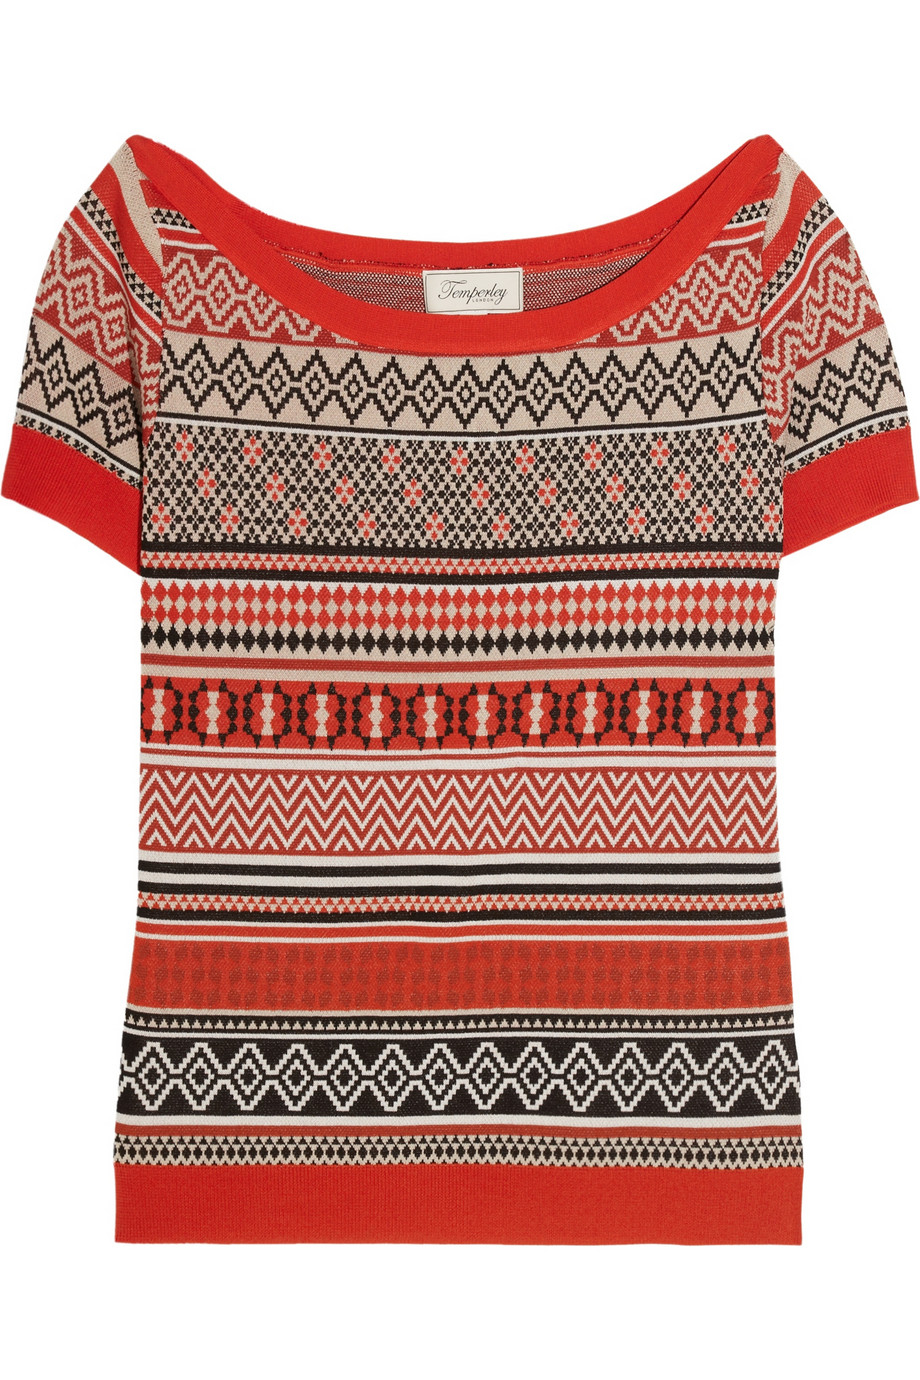 Lyst - Temperley London Mimi Stretch Jacquard-Knit Top in Red